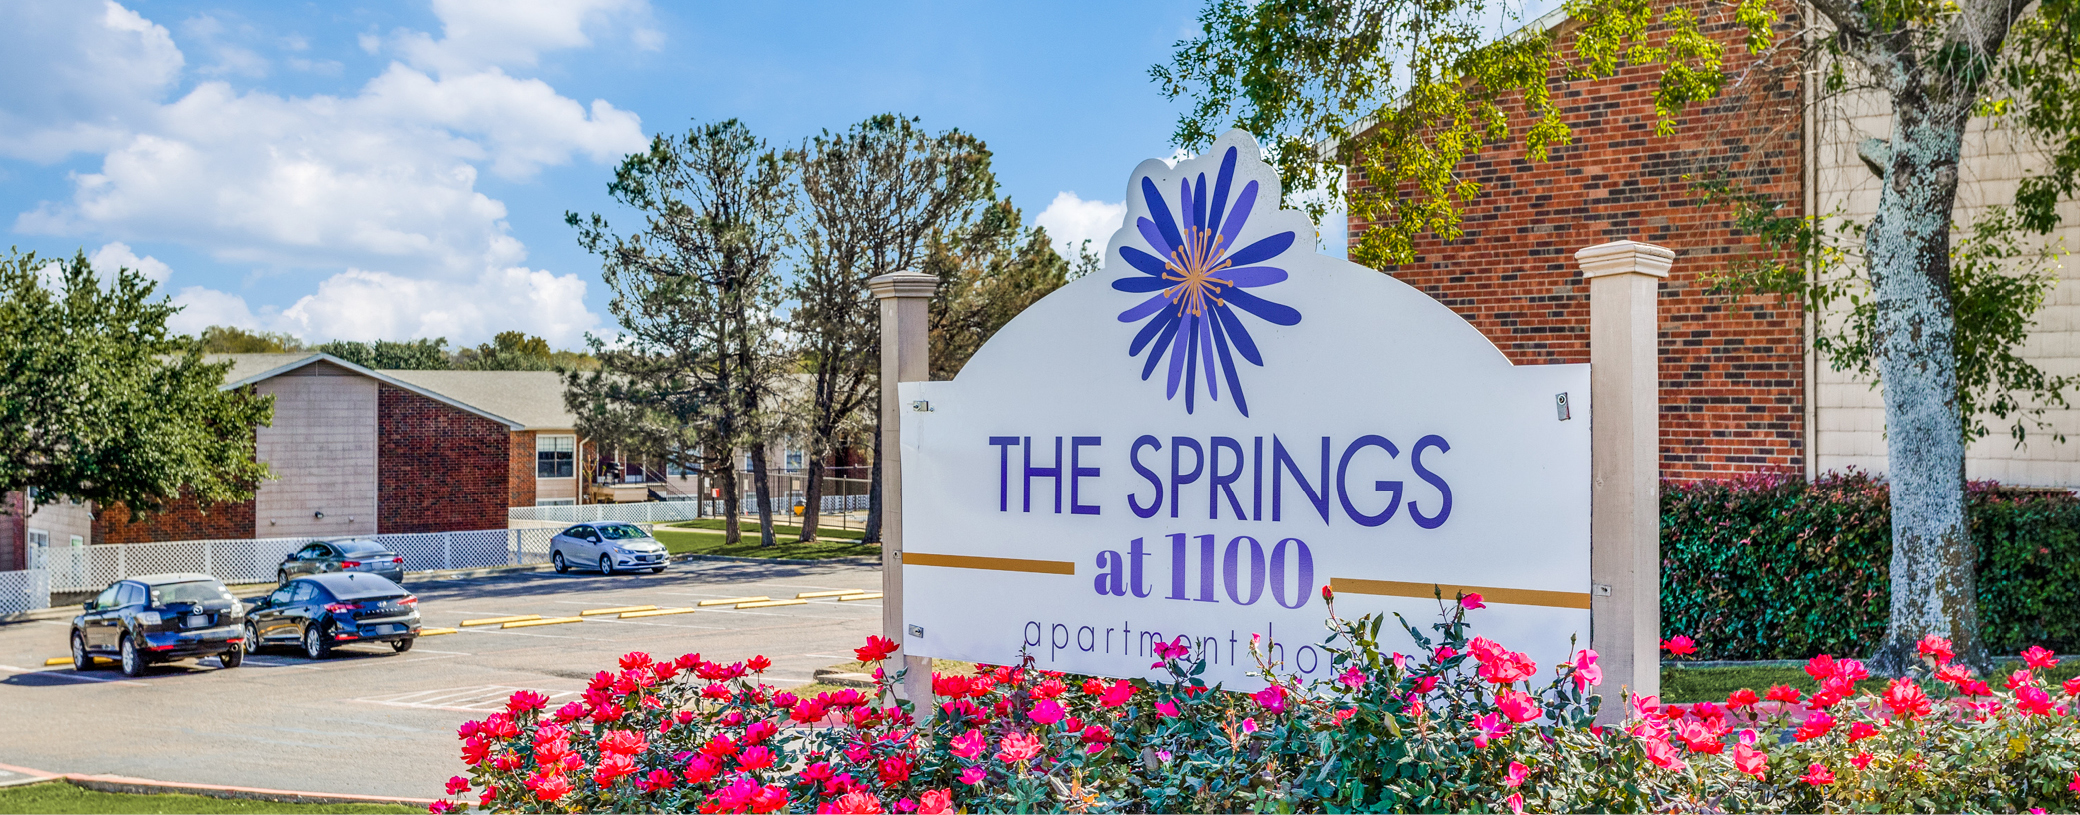 A view of the signage at The Springs at 1100, along with several buildings and a parking lot in the back.